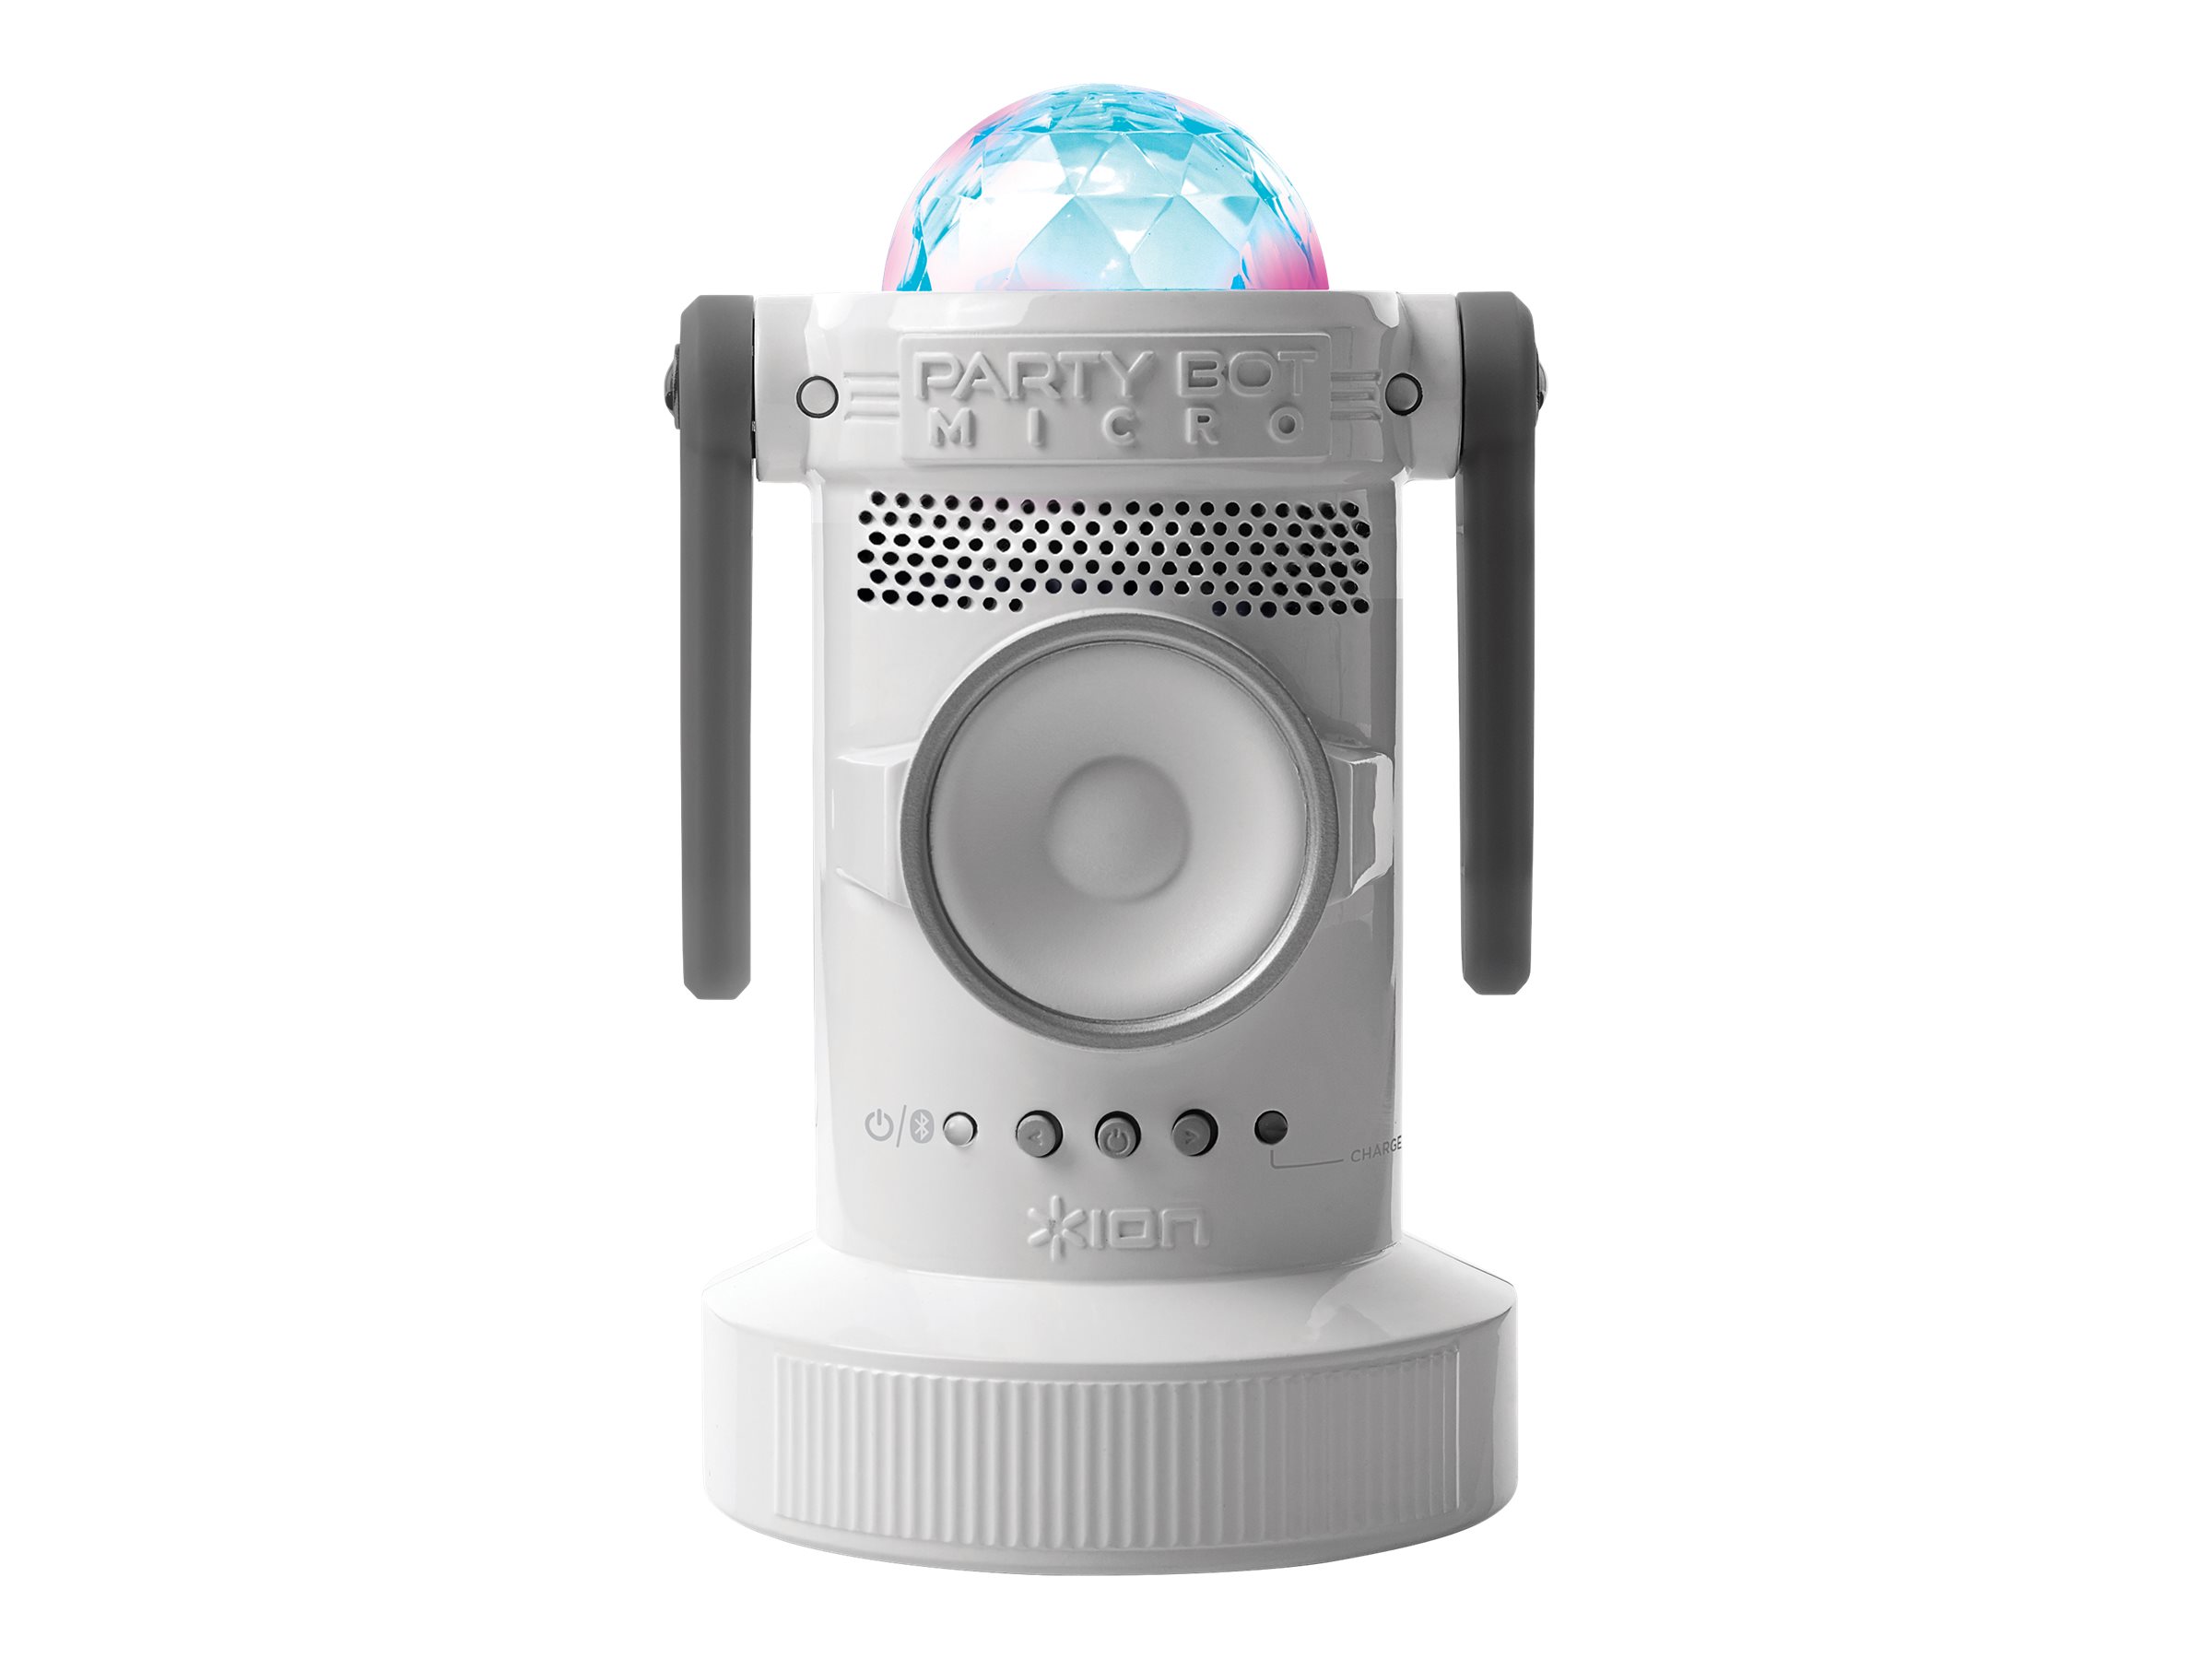 ION Audio Party Bot Micro - Speaker - for portable use - wireless - Bluetooth - image 2 of 4